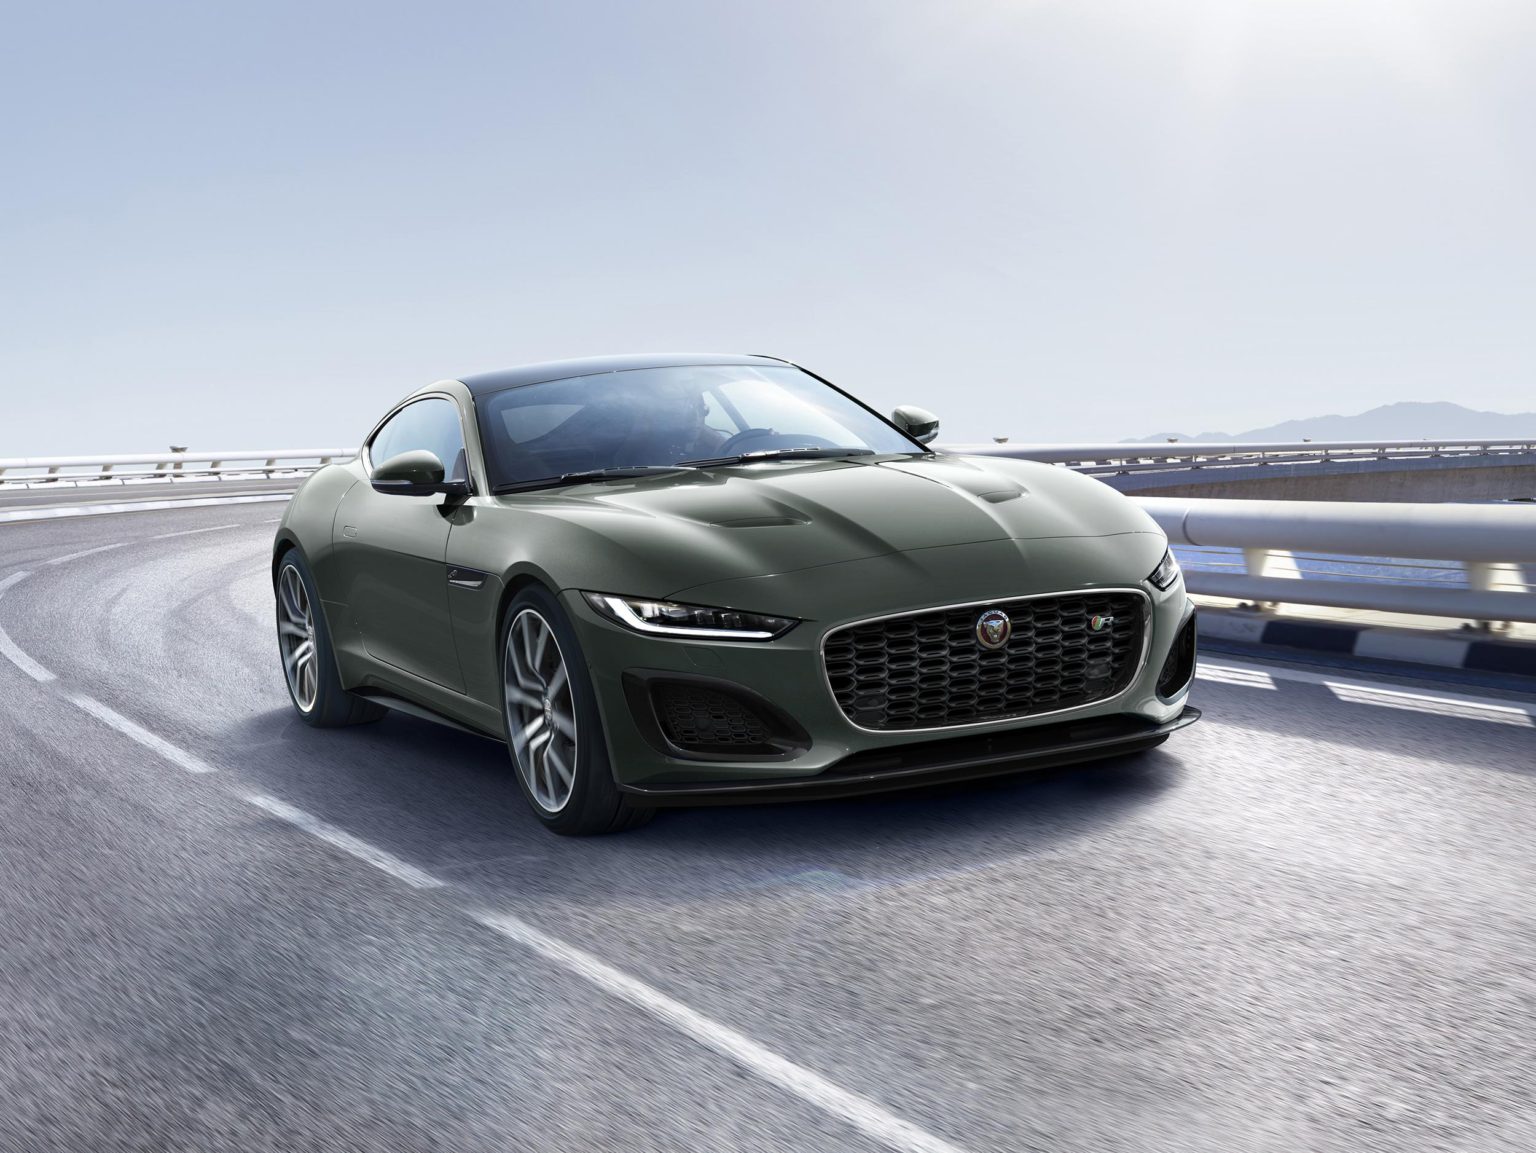 The 2021 Jaguar F-Type Heritage 60 Edition commemorates the 60th birthday of the E-type.